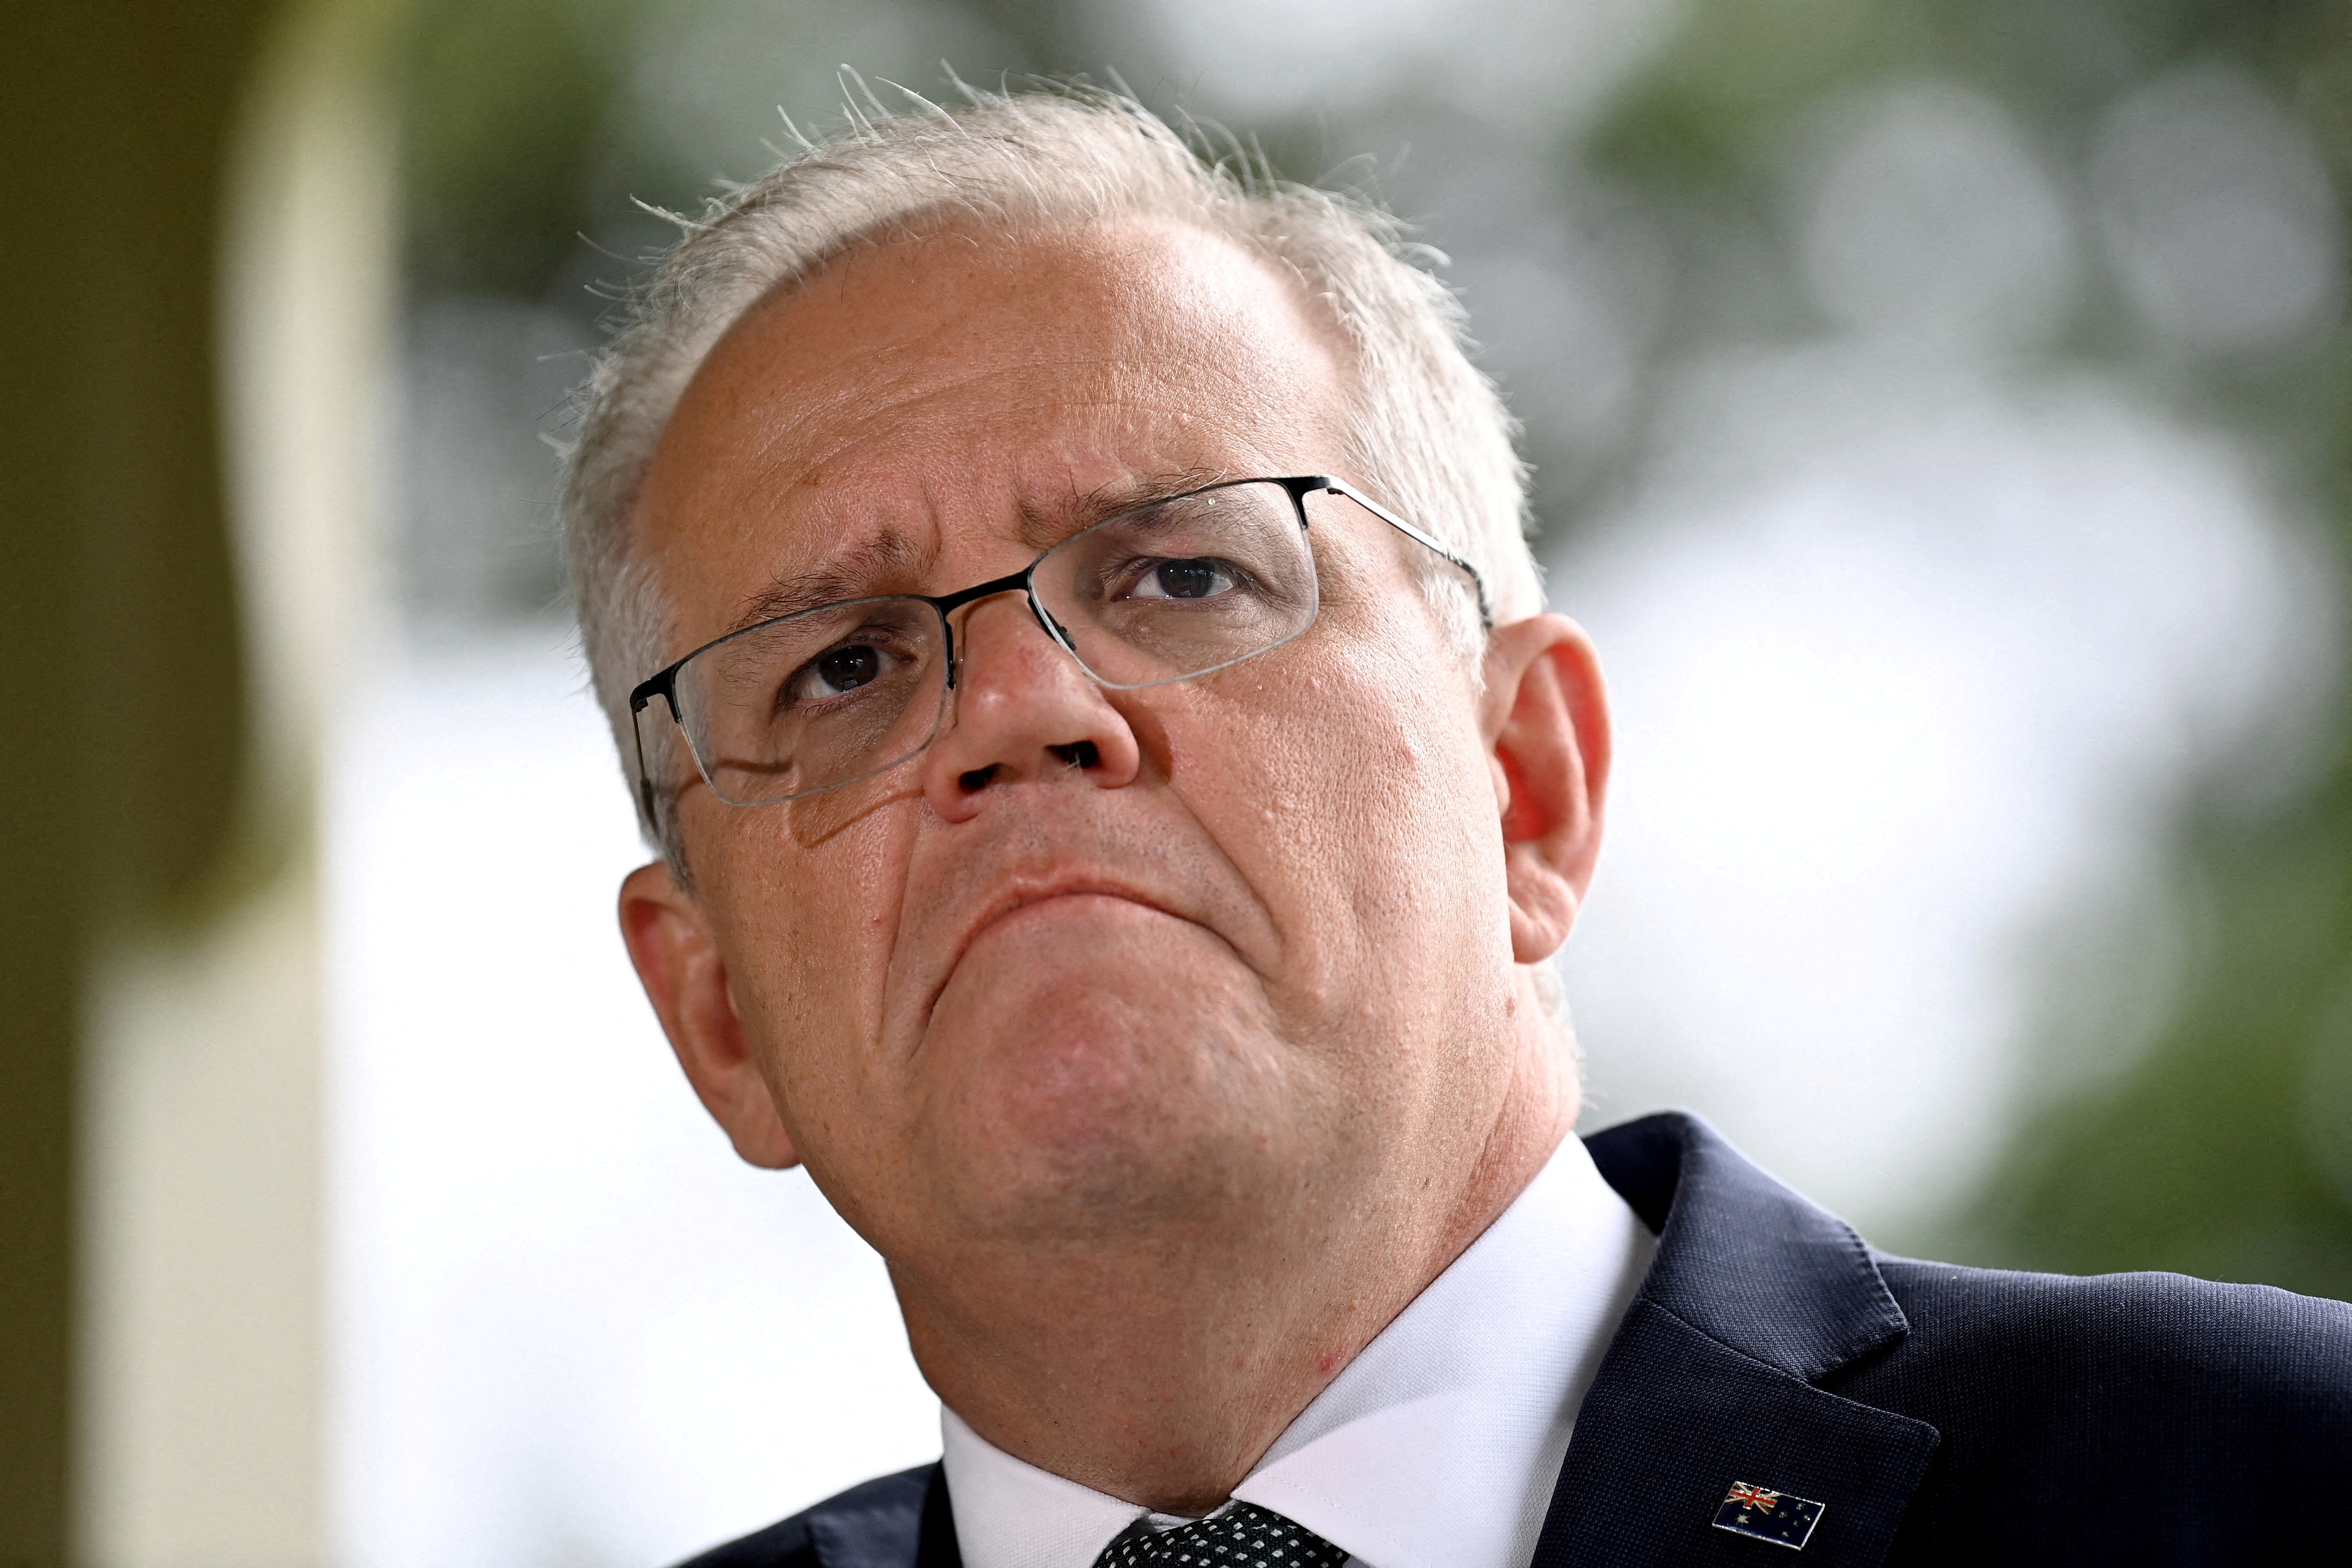 FILE PHOTO: Australia's Prime Minister Scott Morrison reacts as he speaks to the media during a press conference at Kirribilli House in Sydney, Australia, February 24, 2022. AAP Image/Bianca De Marchi via REUTERS ATTENTION EDITORS - THIS IMAGE WAS PROVIDED BY A THIRD PARTY. NO RESALES. NO ARCHIVE. AUSTRALIA OUT. NEW ZEALAND OUT. NO COMMERCIAL OR EDITORIAL SALES IN NEW ZEALAND. NO COMMERCIAL OR EDITORIAL SALES IN AUSTRALIA./File Photo